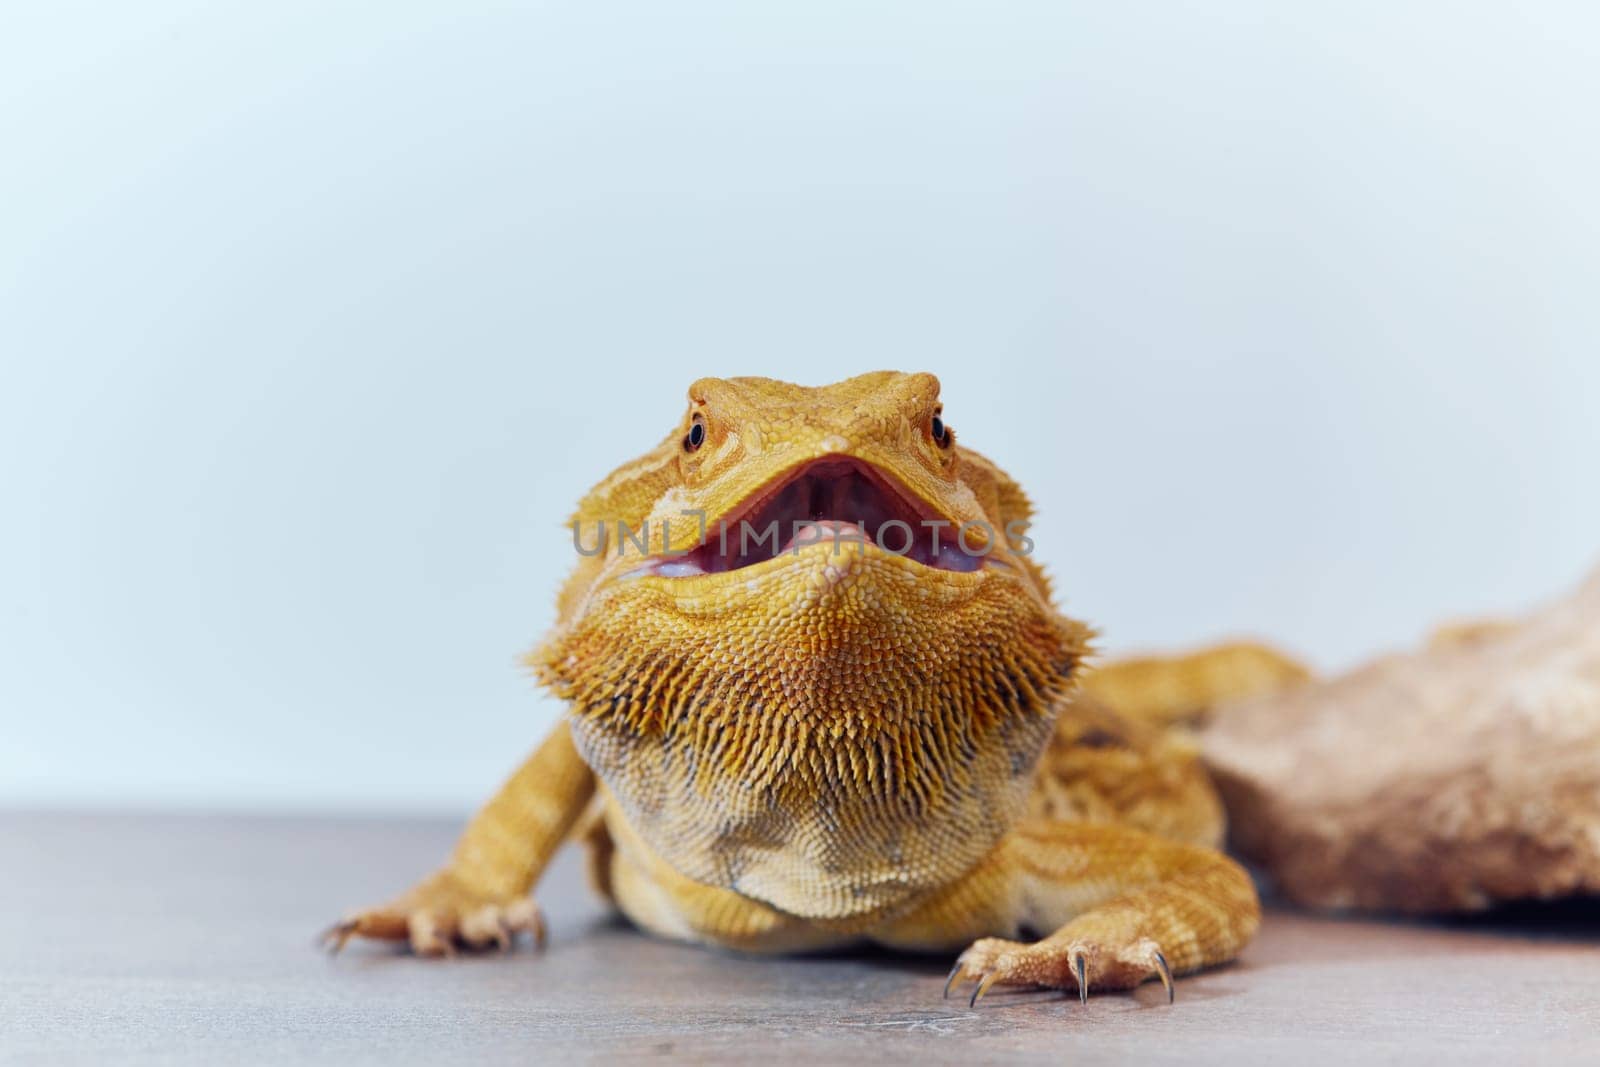 Close-up photo of a bearded dragon's vibrant yellow textured scales against a crisp white background, showcasing the mesmerizing beauty of this exotic reptile.